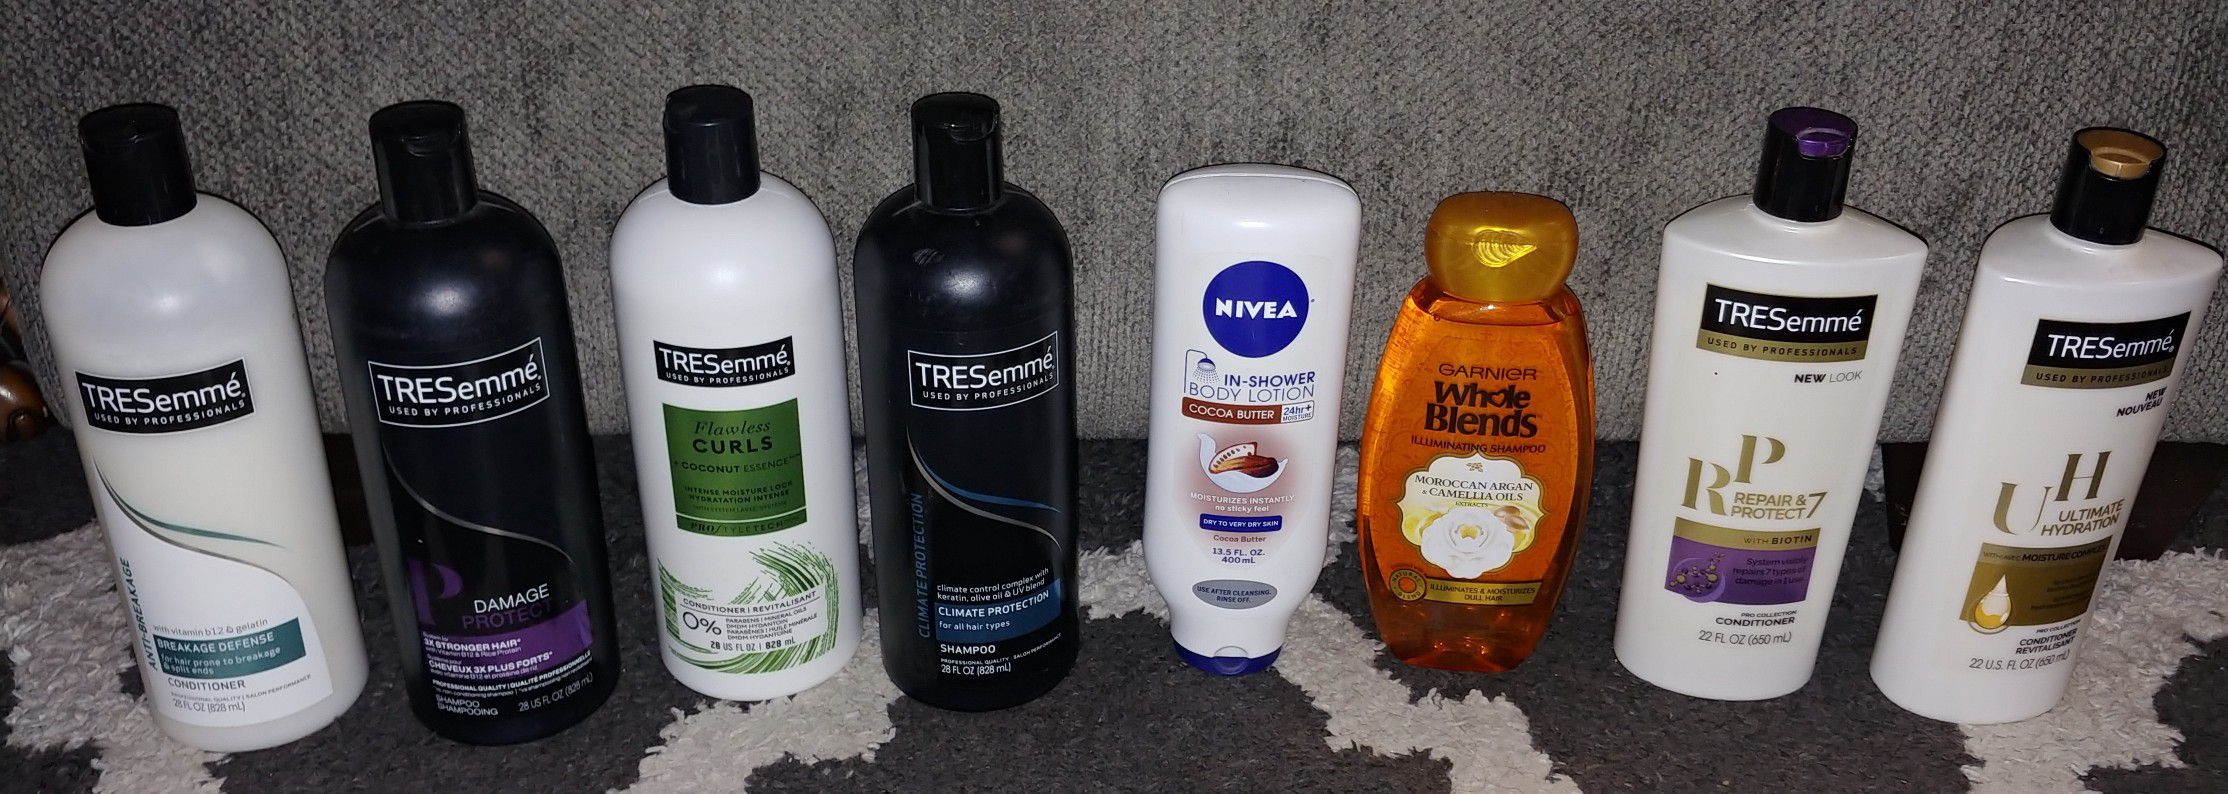 Mixed Shampoos And Conditioners